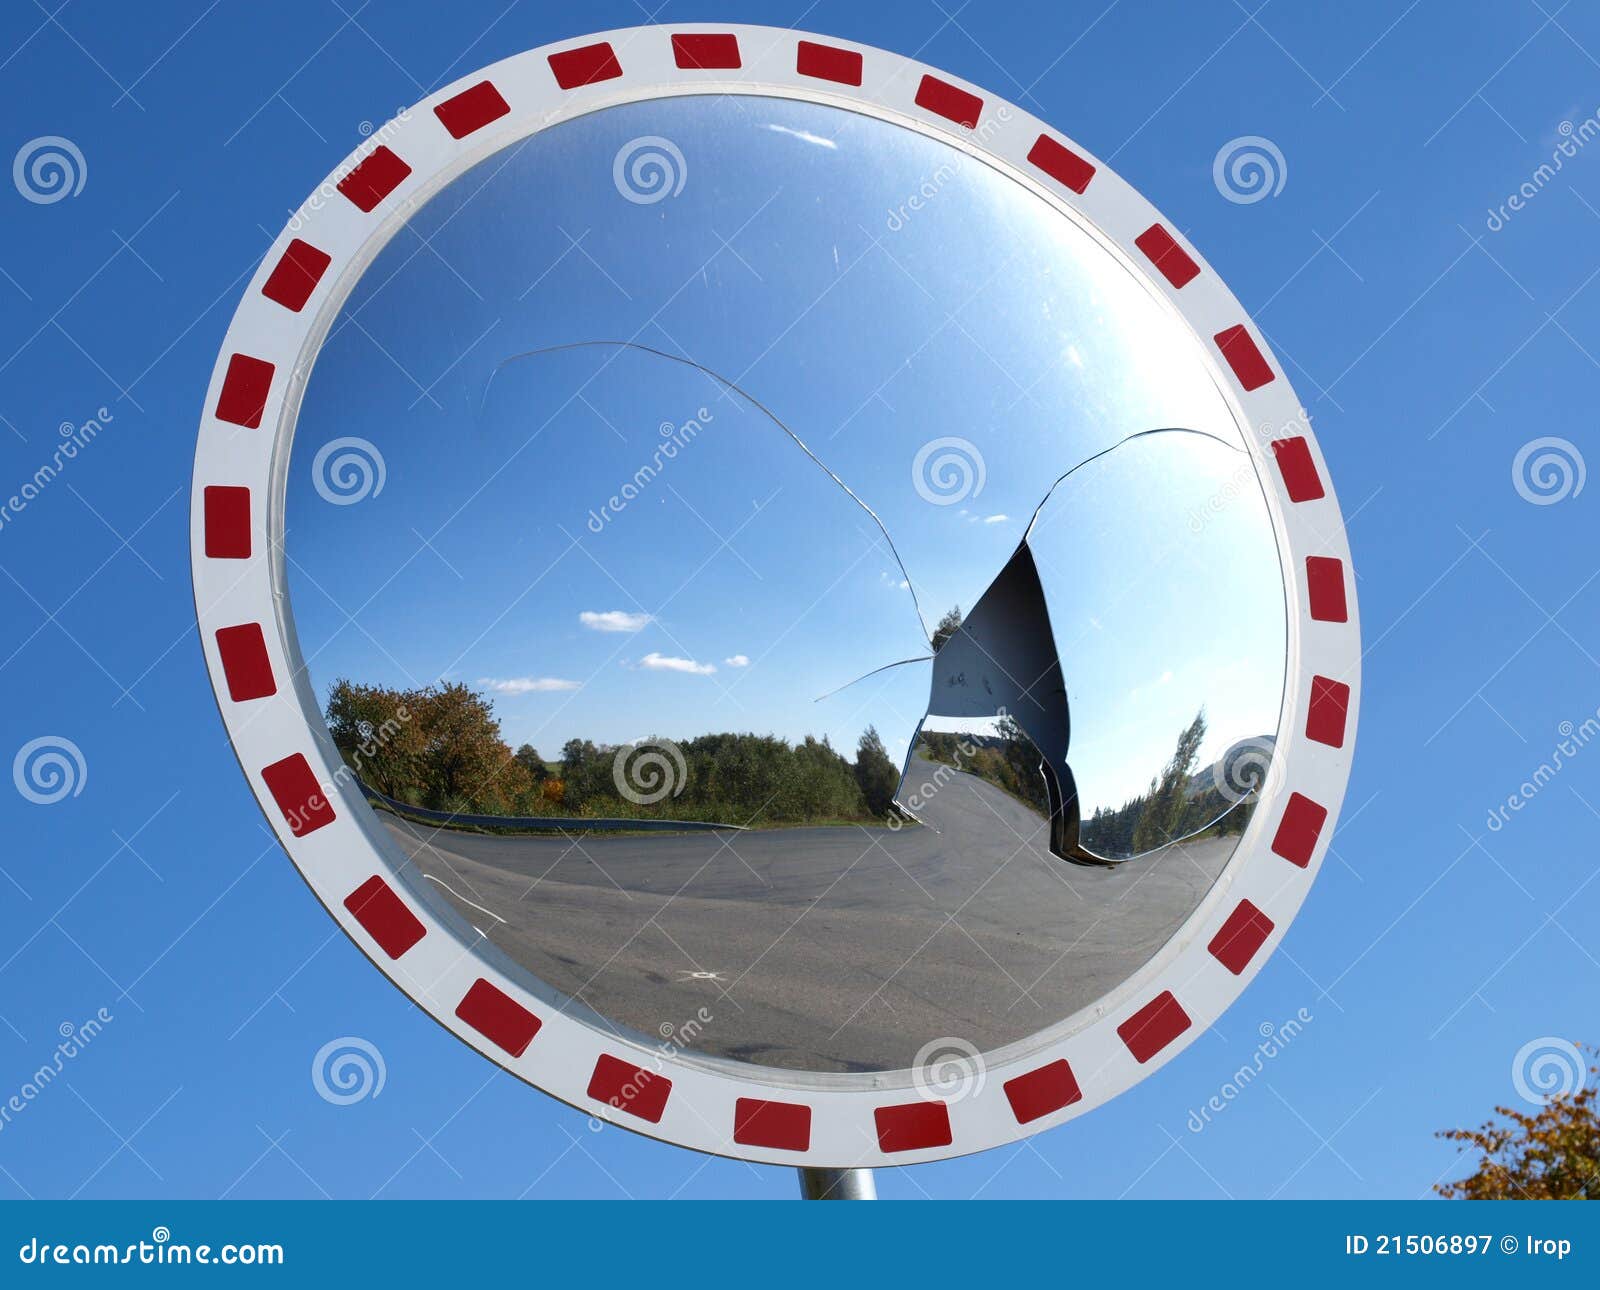 convex mirror shattered